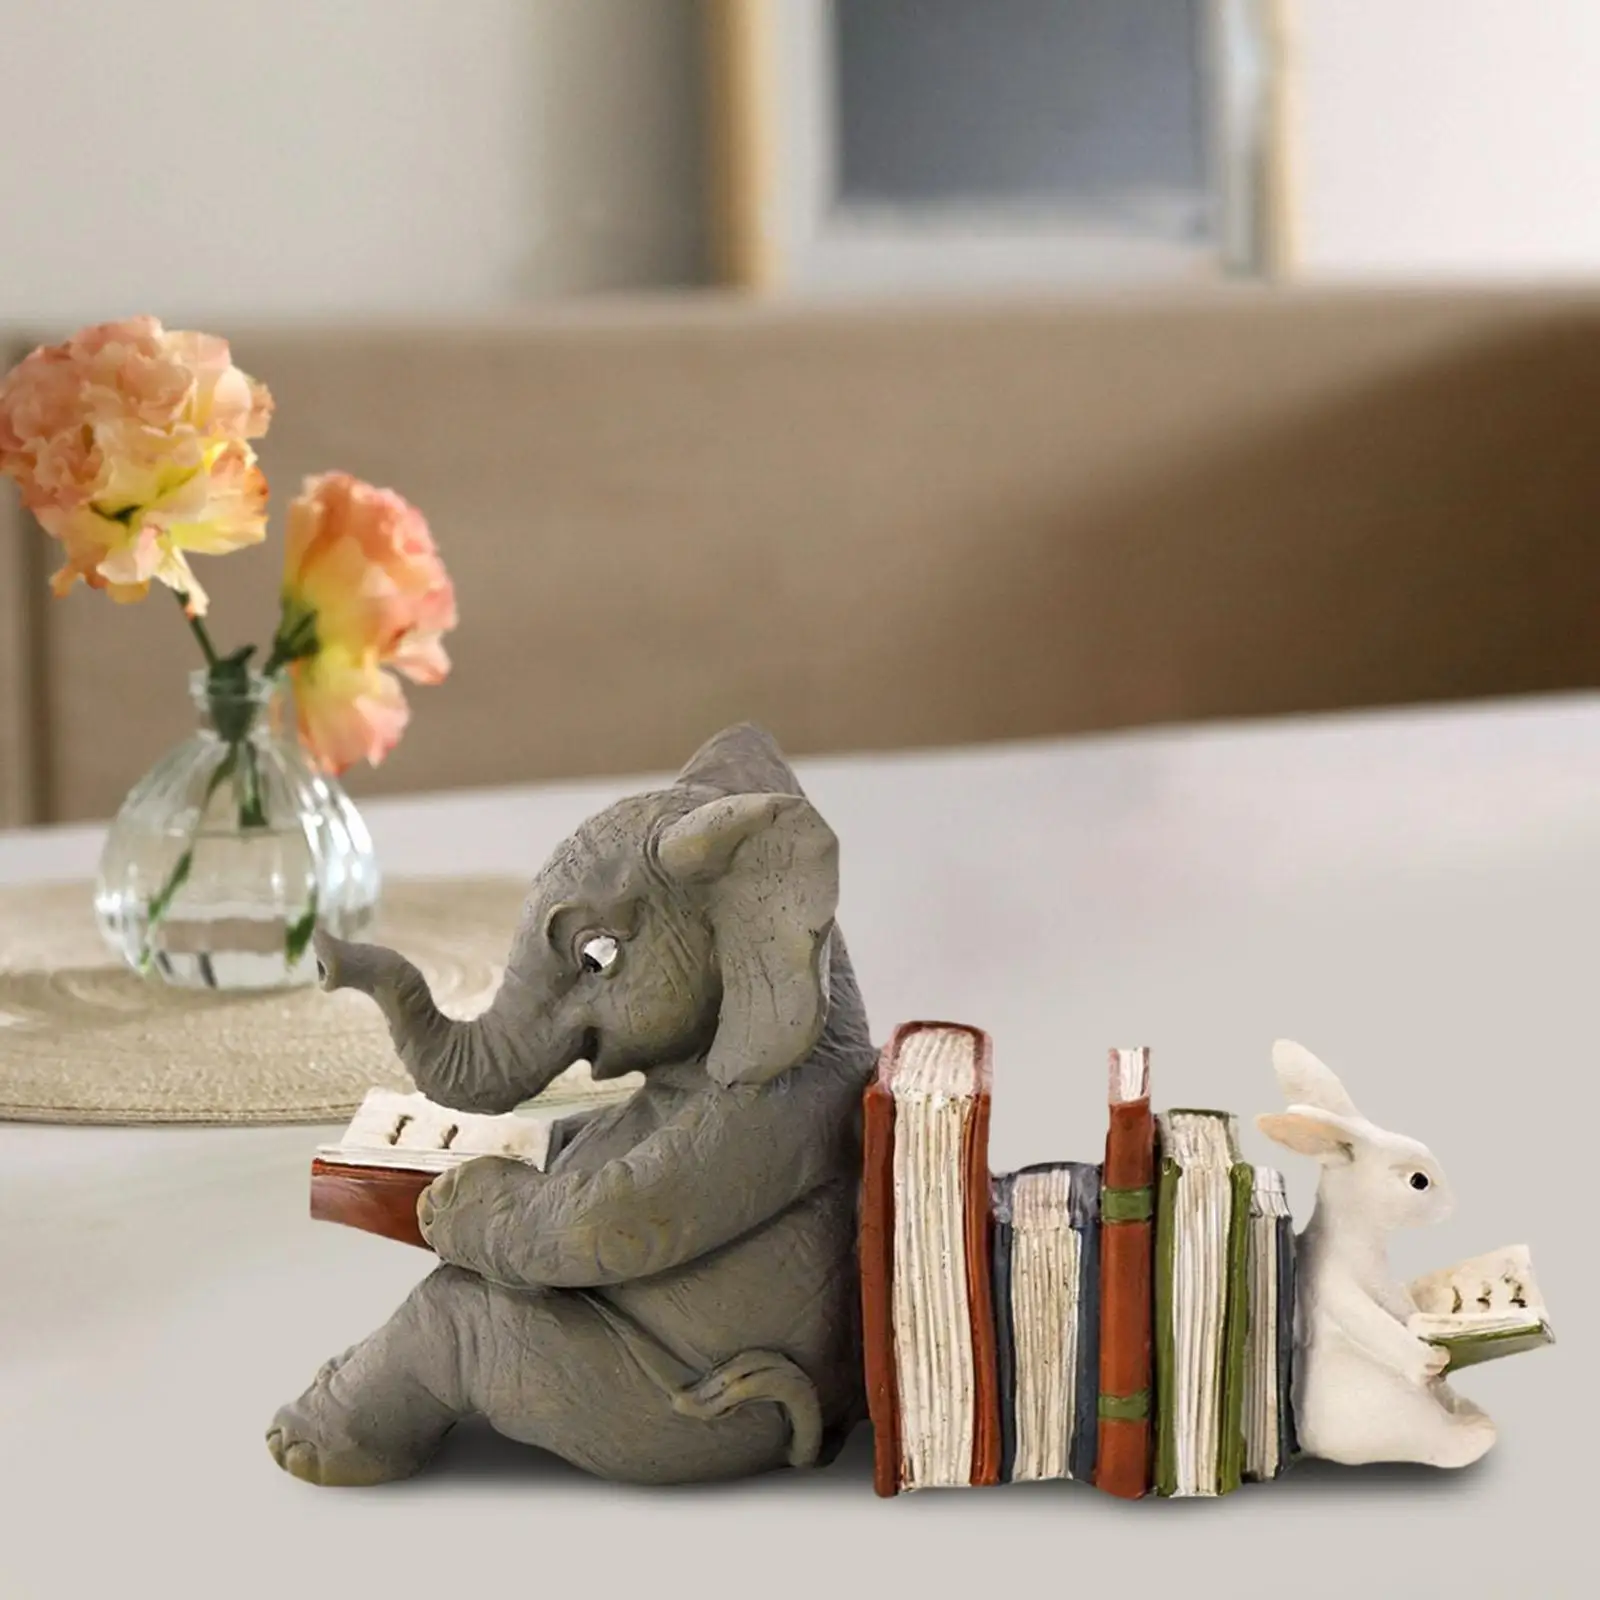 Cute Elephant and Rabbit Statue Ornaments Art Crafts Resin Animal Figurines for Tabletop Home TV Cabinet Garden Xmas Decoration